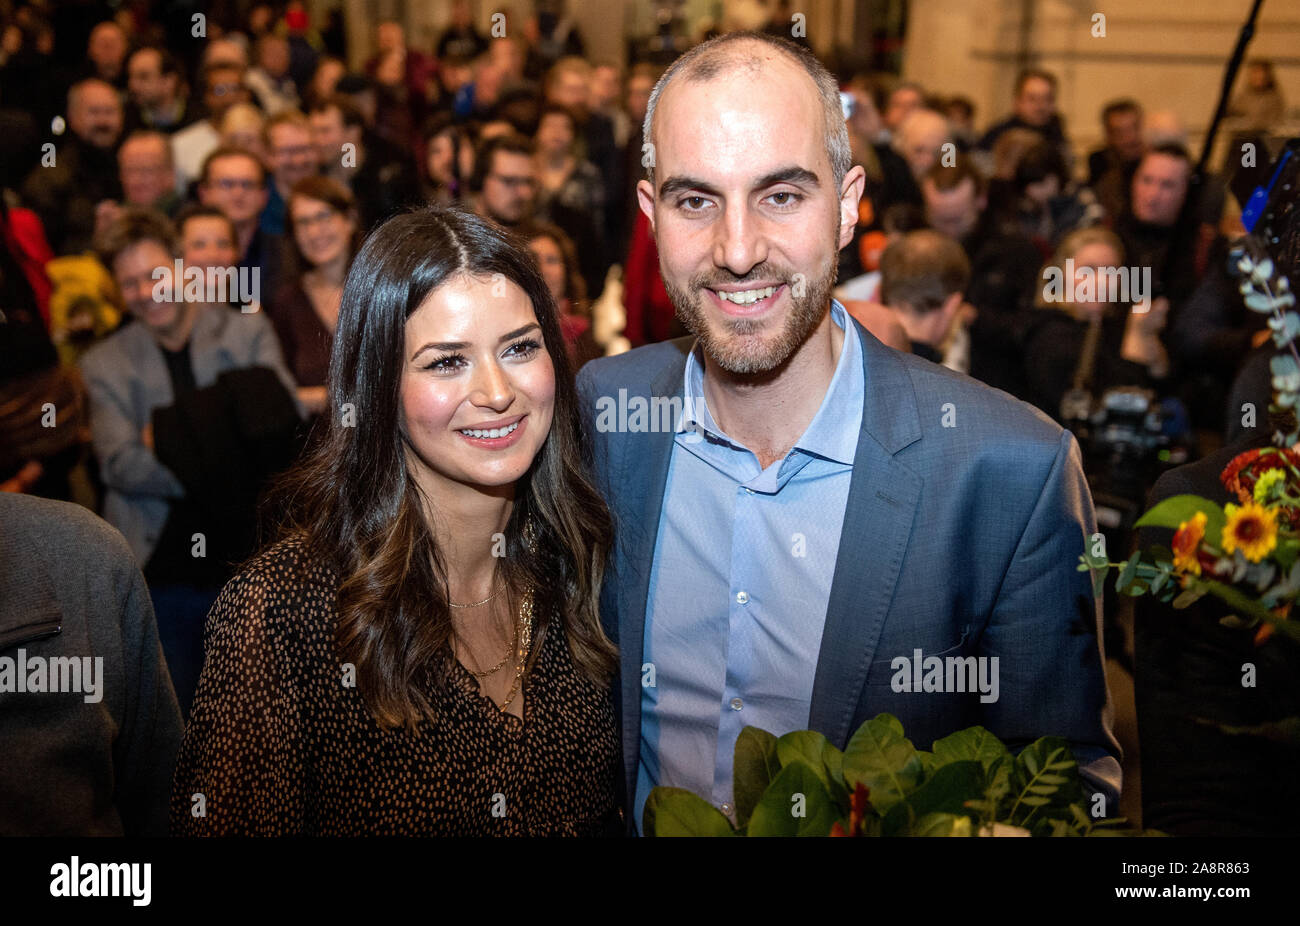 Hanover, Germany. 10th Nov, 2019. Belit Onay (Bündnis 90/Die Grünen), top candidate in the mayoral election, is standing with his wife Derya in the town hall after the announcement of the election results. Since none of the ten candidates received more than 50 percent of the votes in the first ballot on 27 October 2019, a run-off ballot was held. Credit: Hauke-Christian Dittrich/dpa/Alamy Live News Stock Photo